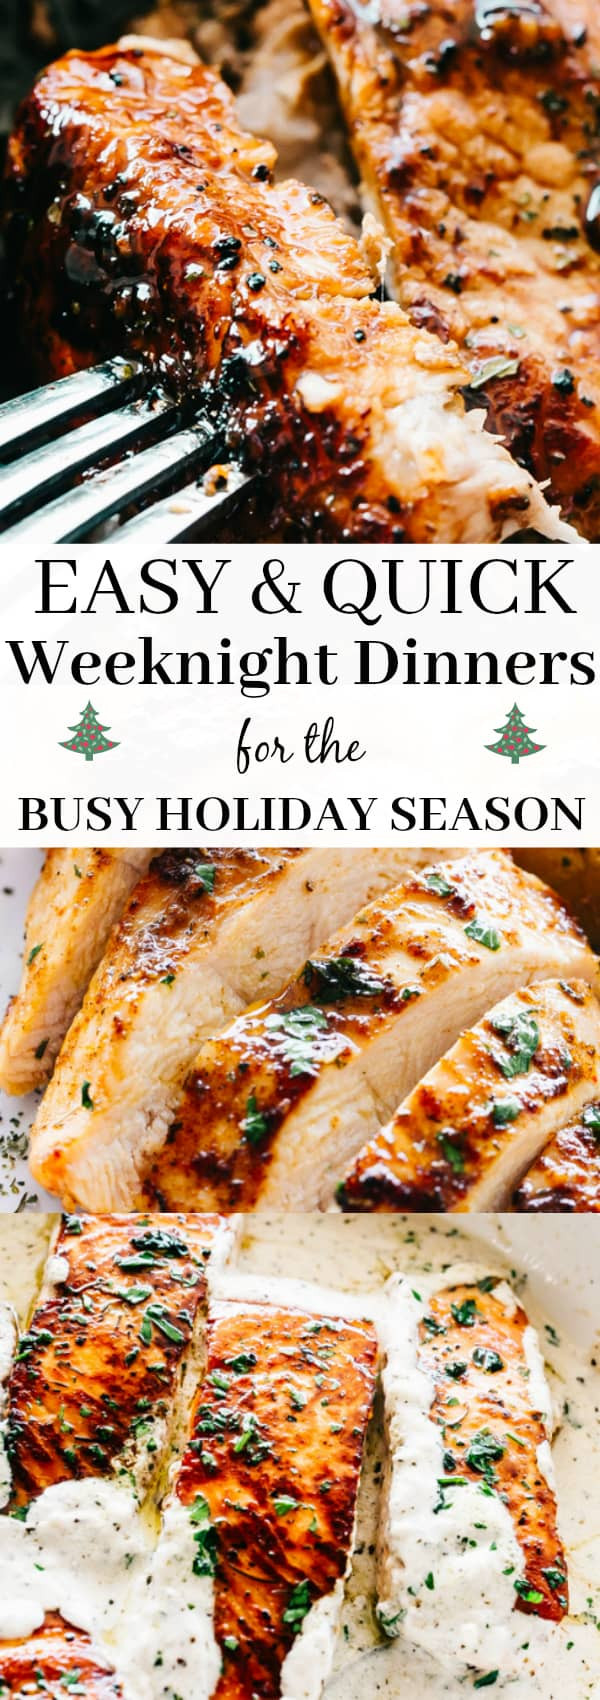 Quick And Easy Weeknight Dinners
 20 Easy & Quick Weeknight Dinner Ideas for the Busy